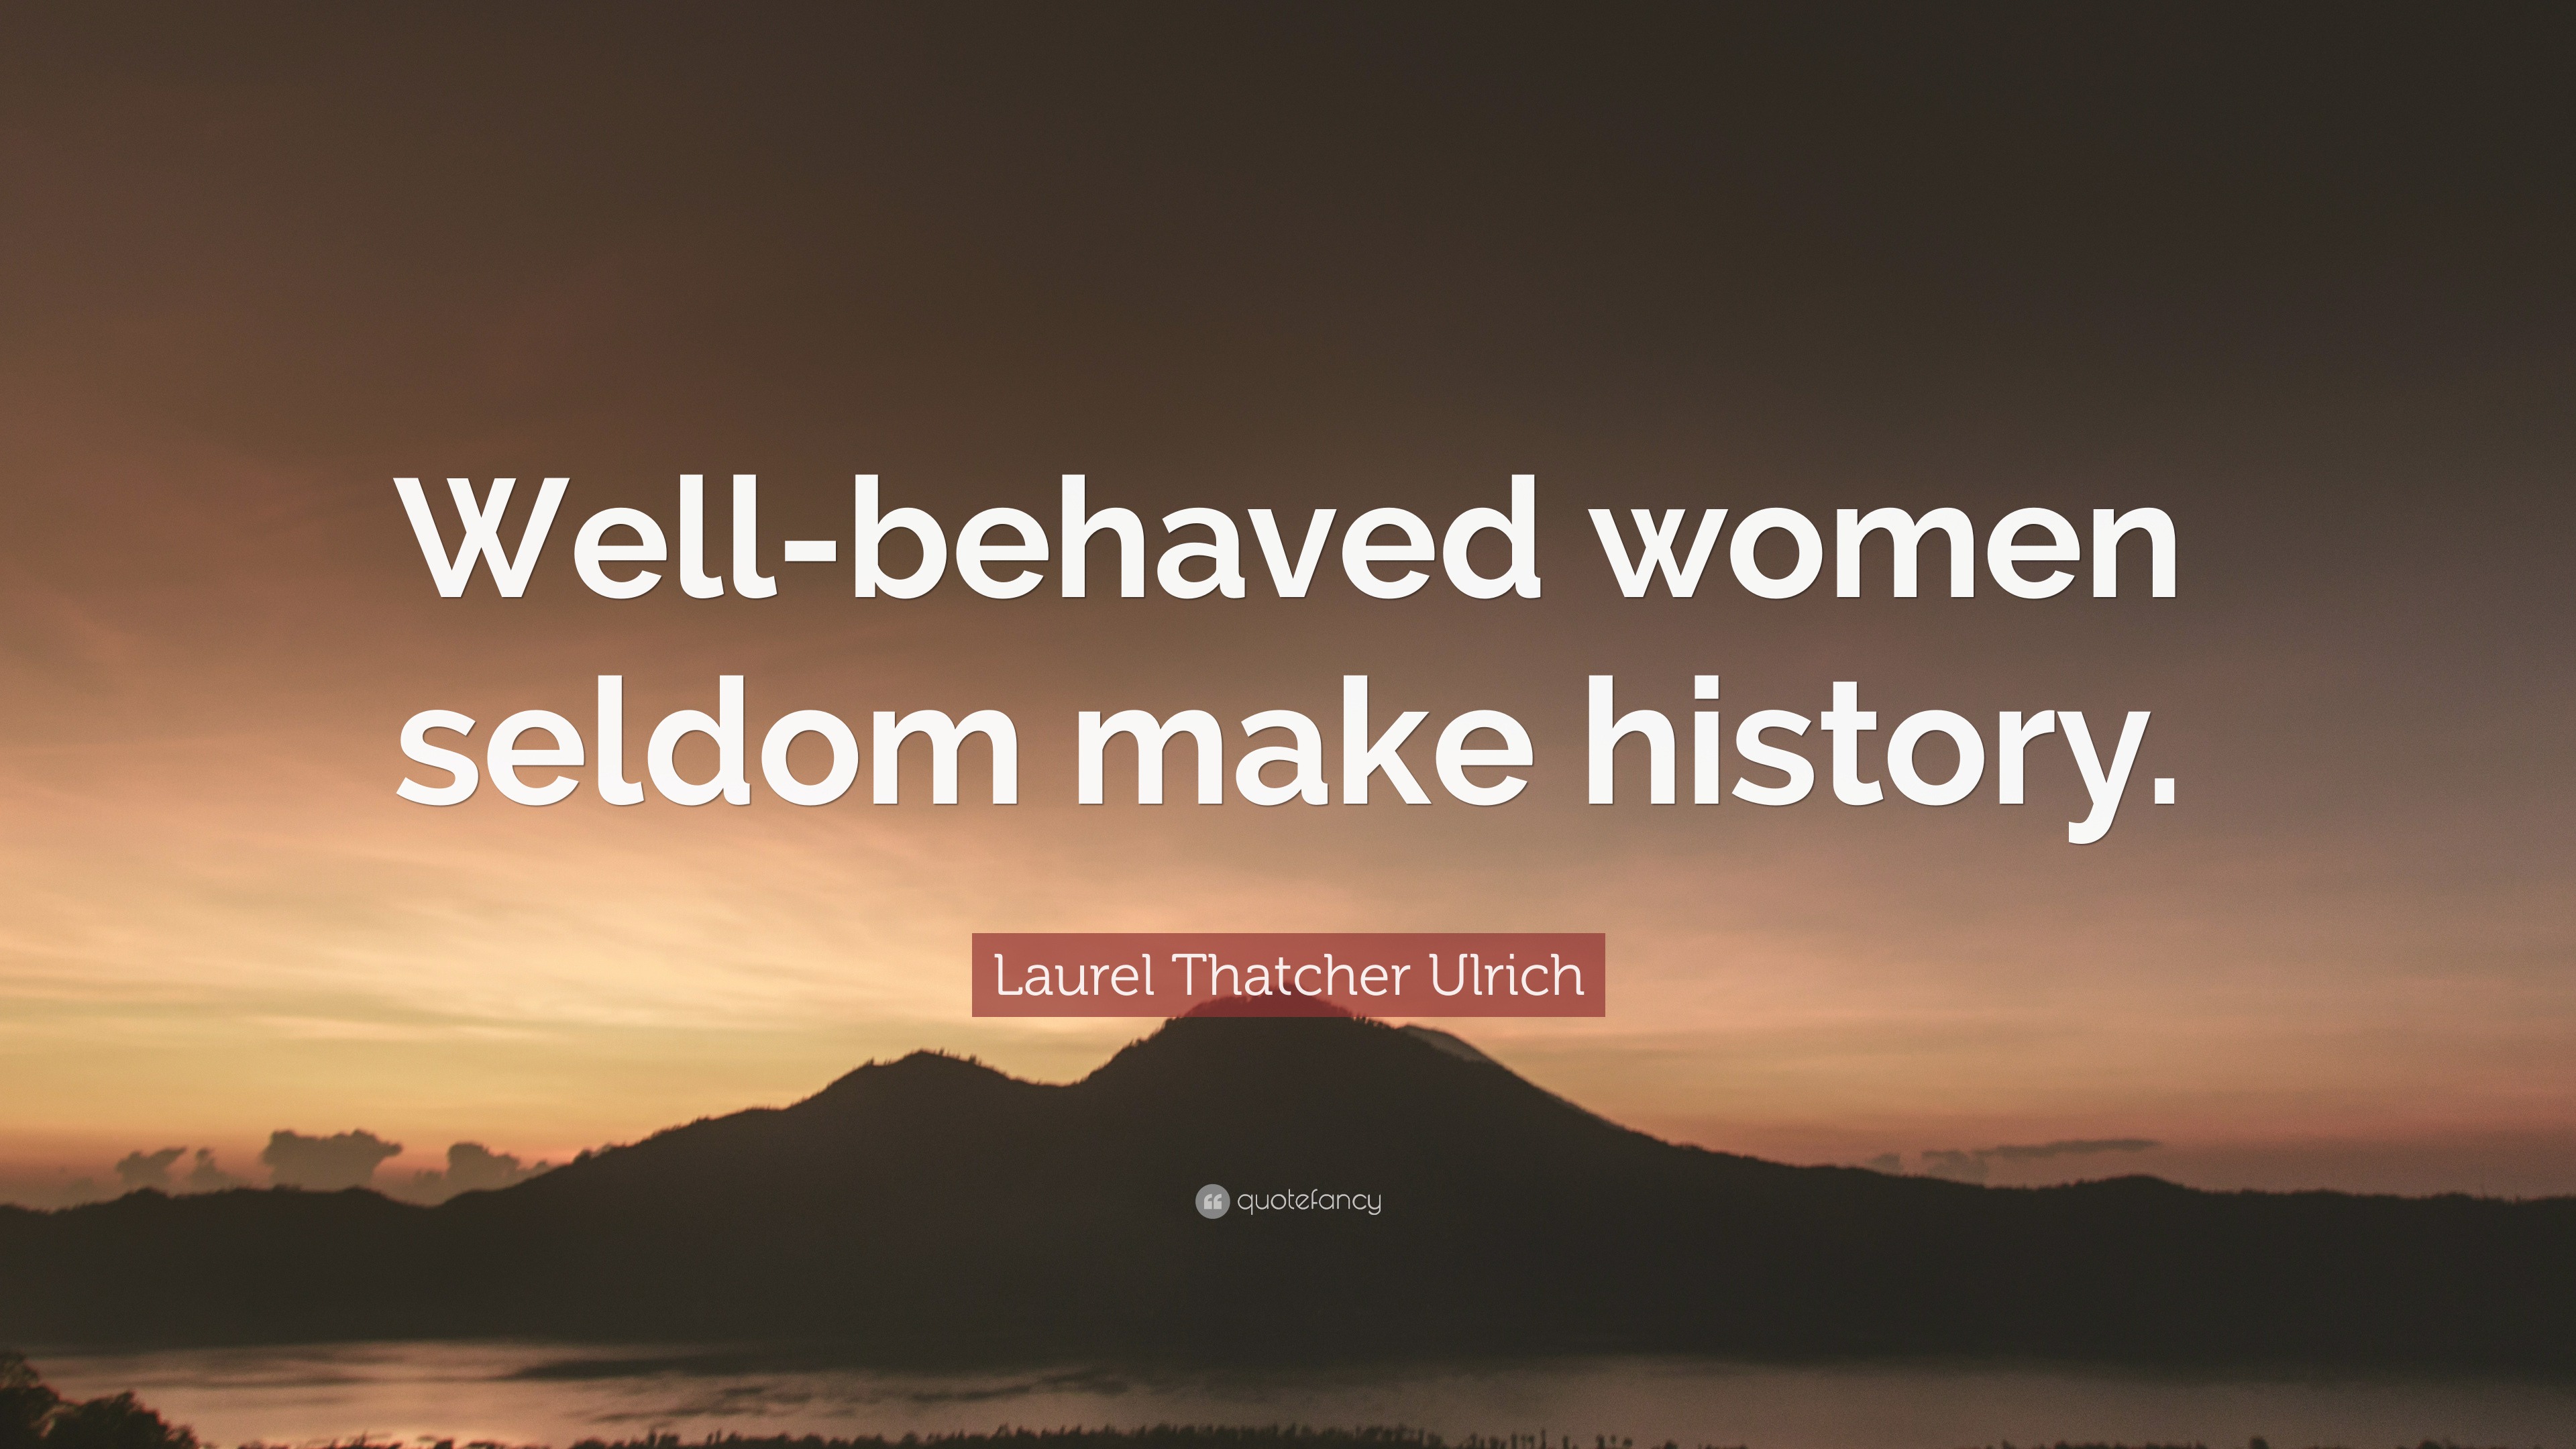 women rarely make history quote